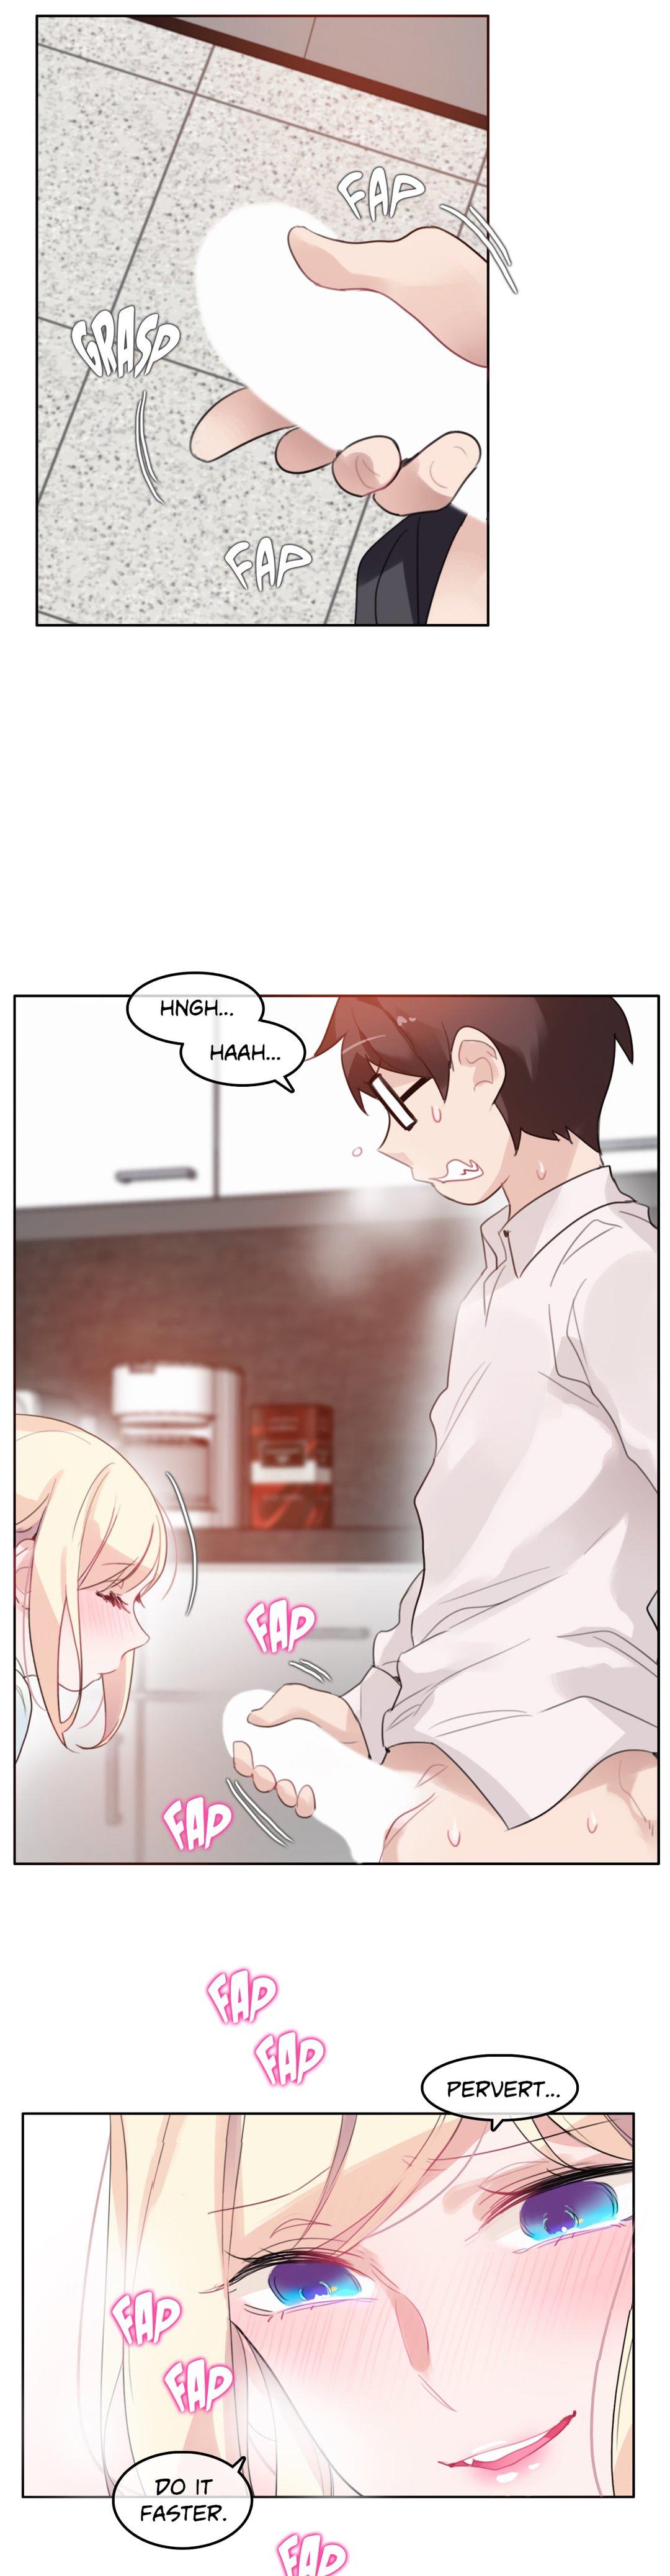 A Pervert's Daily Life Ch. 1-34 719